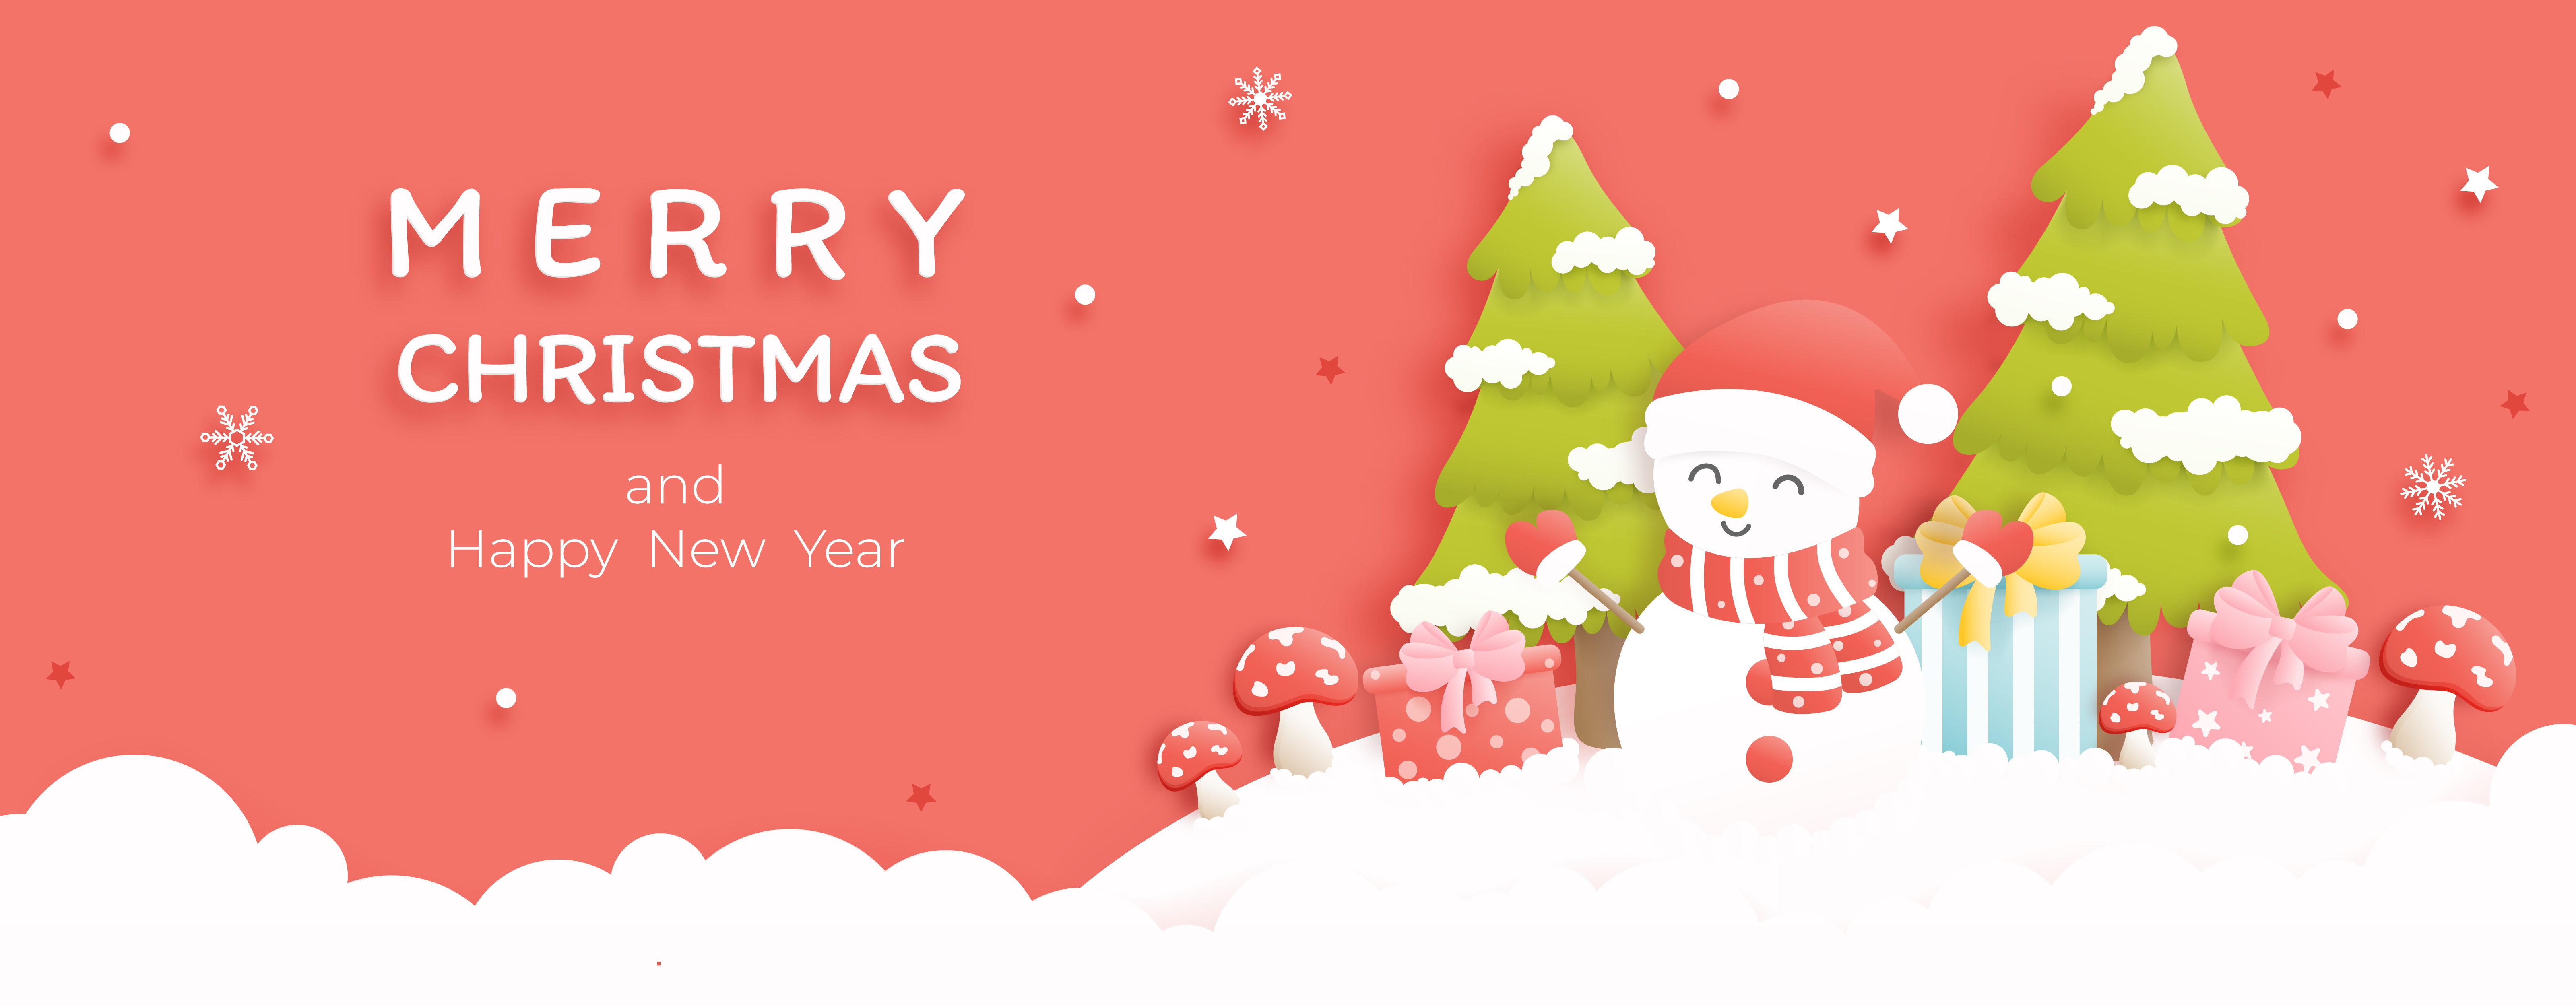 Merry Christmas and happy new year banner background with pine tree, snowman,gift box. Paper art vector illustration